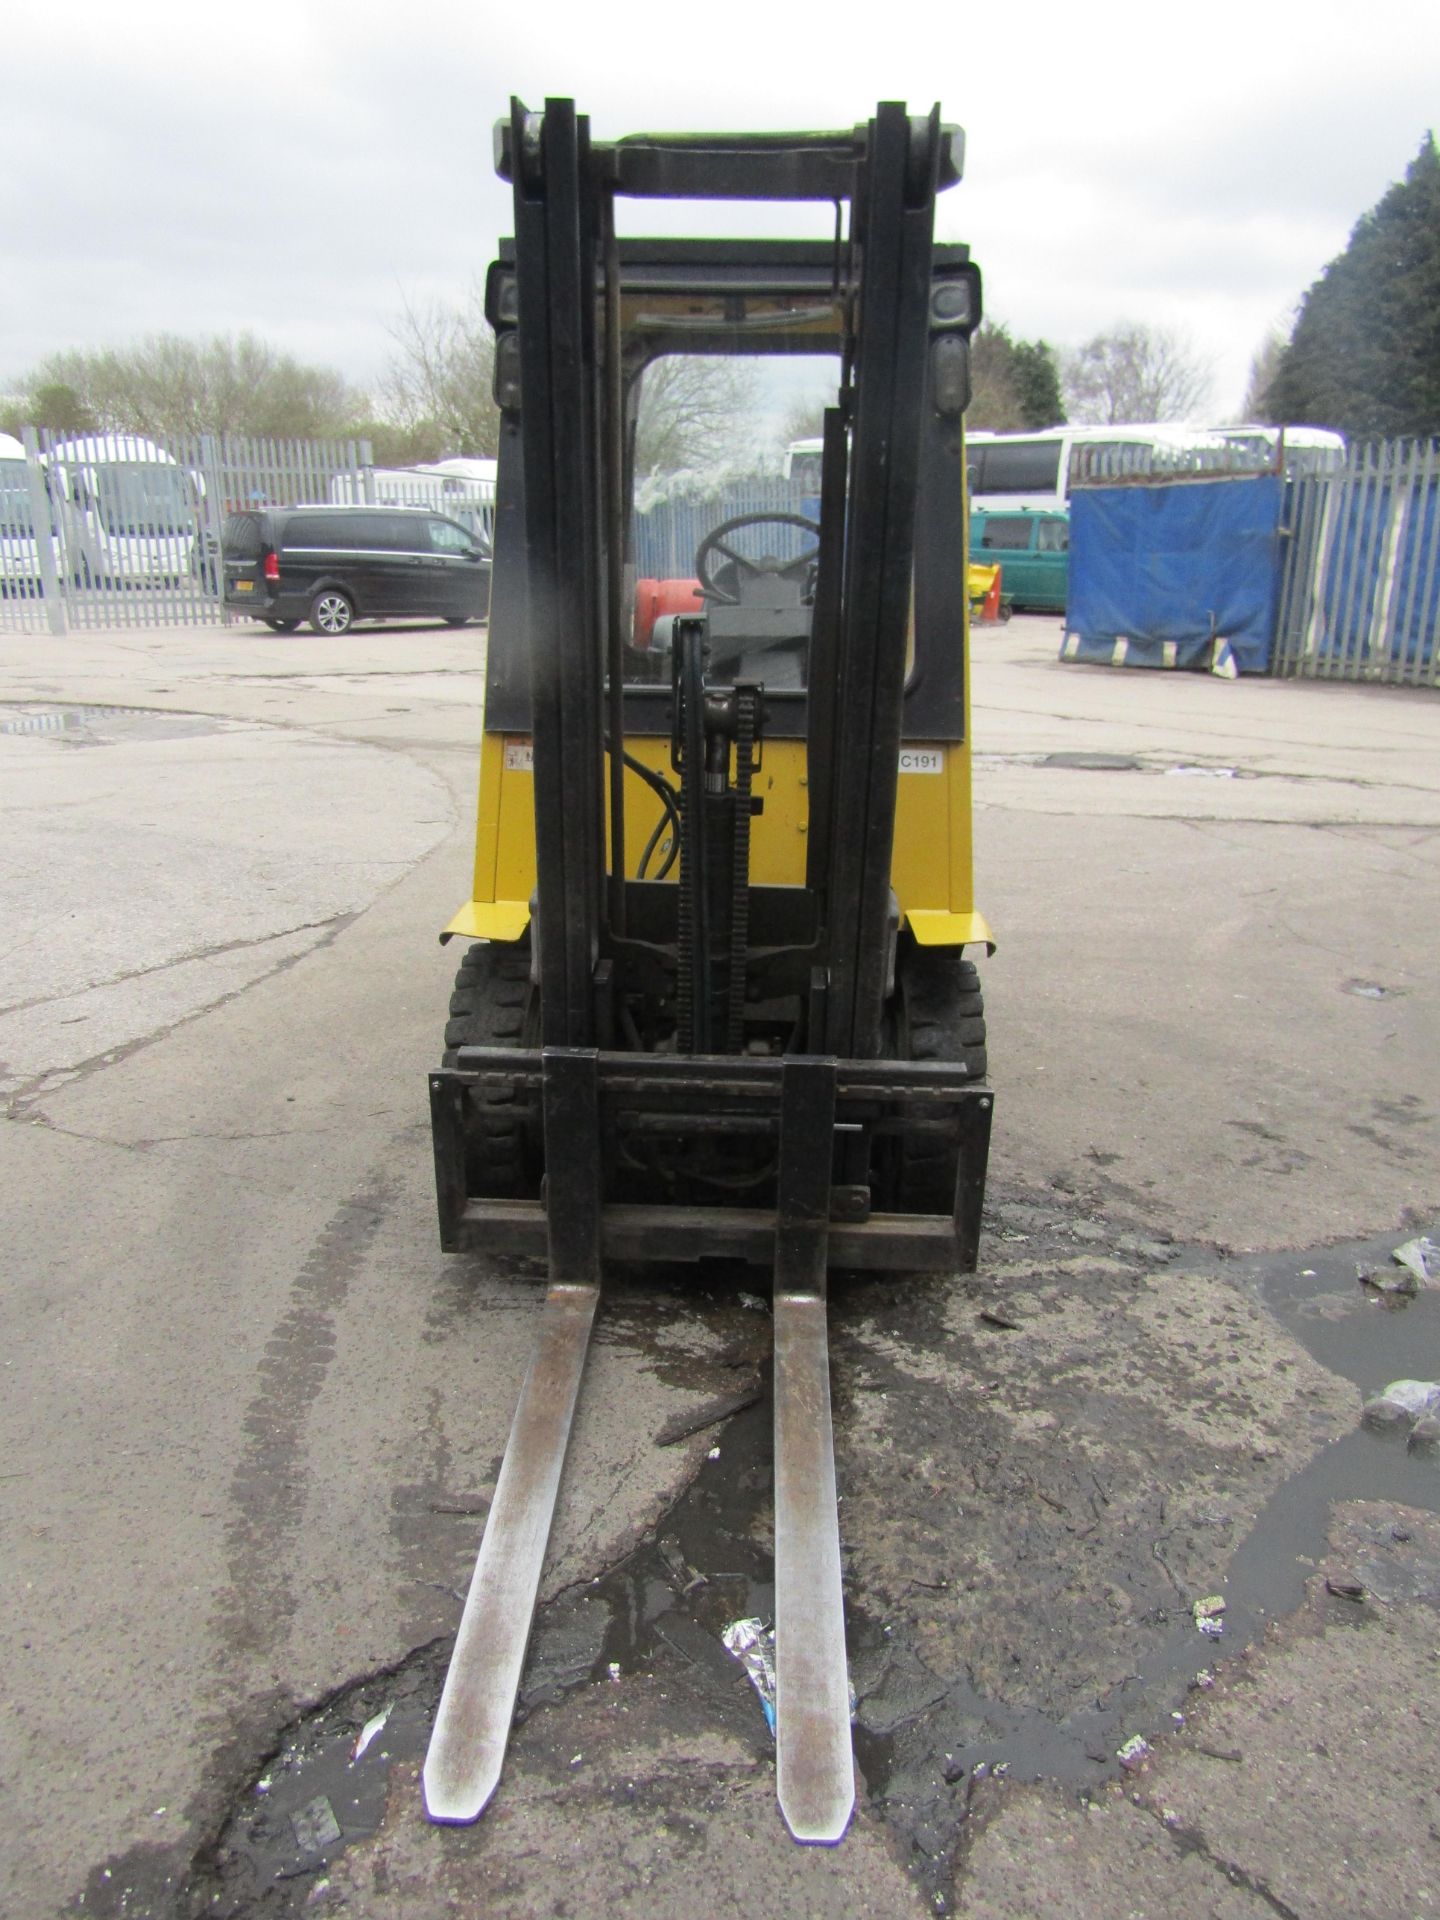 Hyster H2.00Xm Forklift Truck 7235 hours currently manufactured in 2004, has a roof as well as front - Bild 5 aus 12